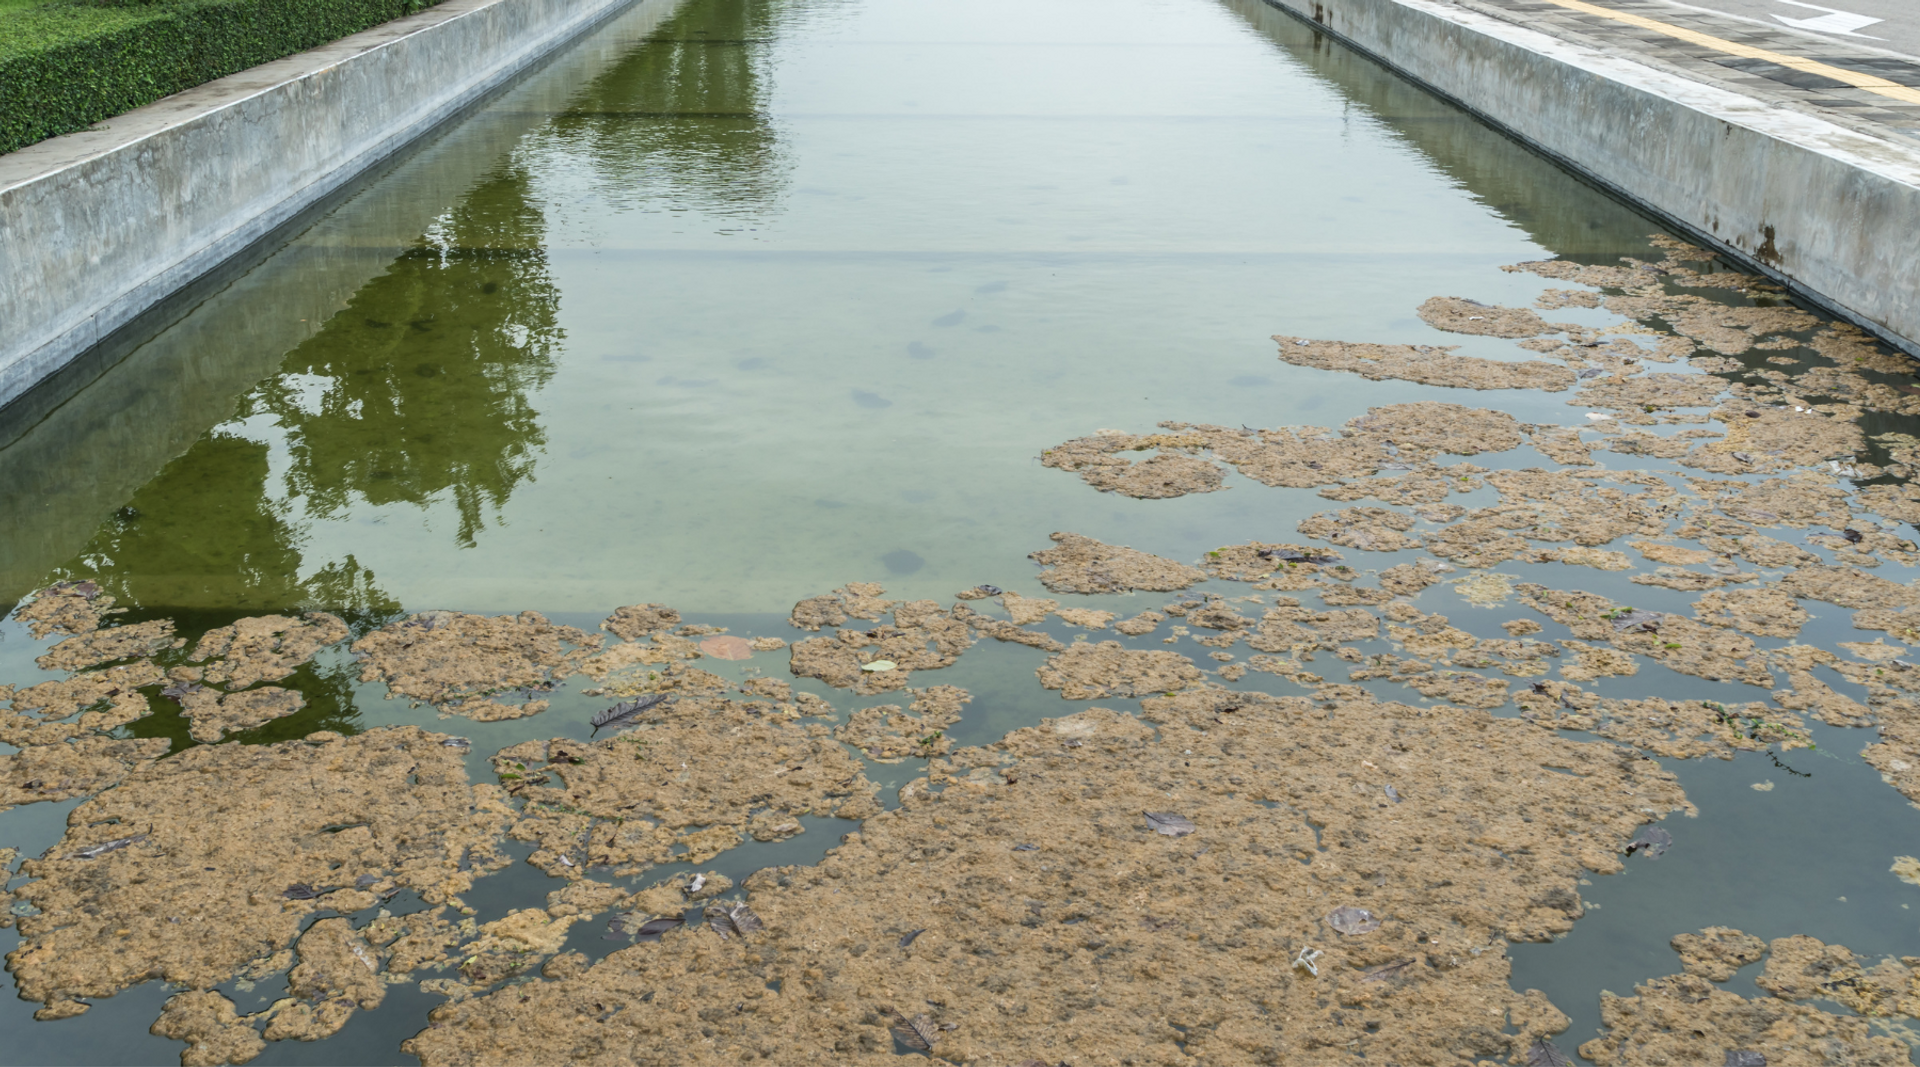 Brown and clumpy denitrification foam floating on the surface of a secondary clarifier